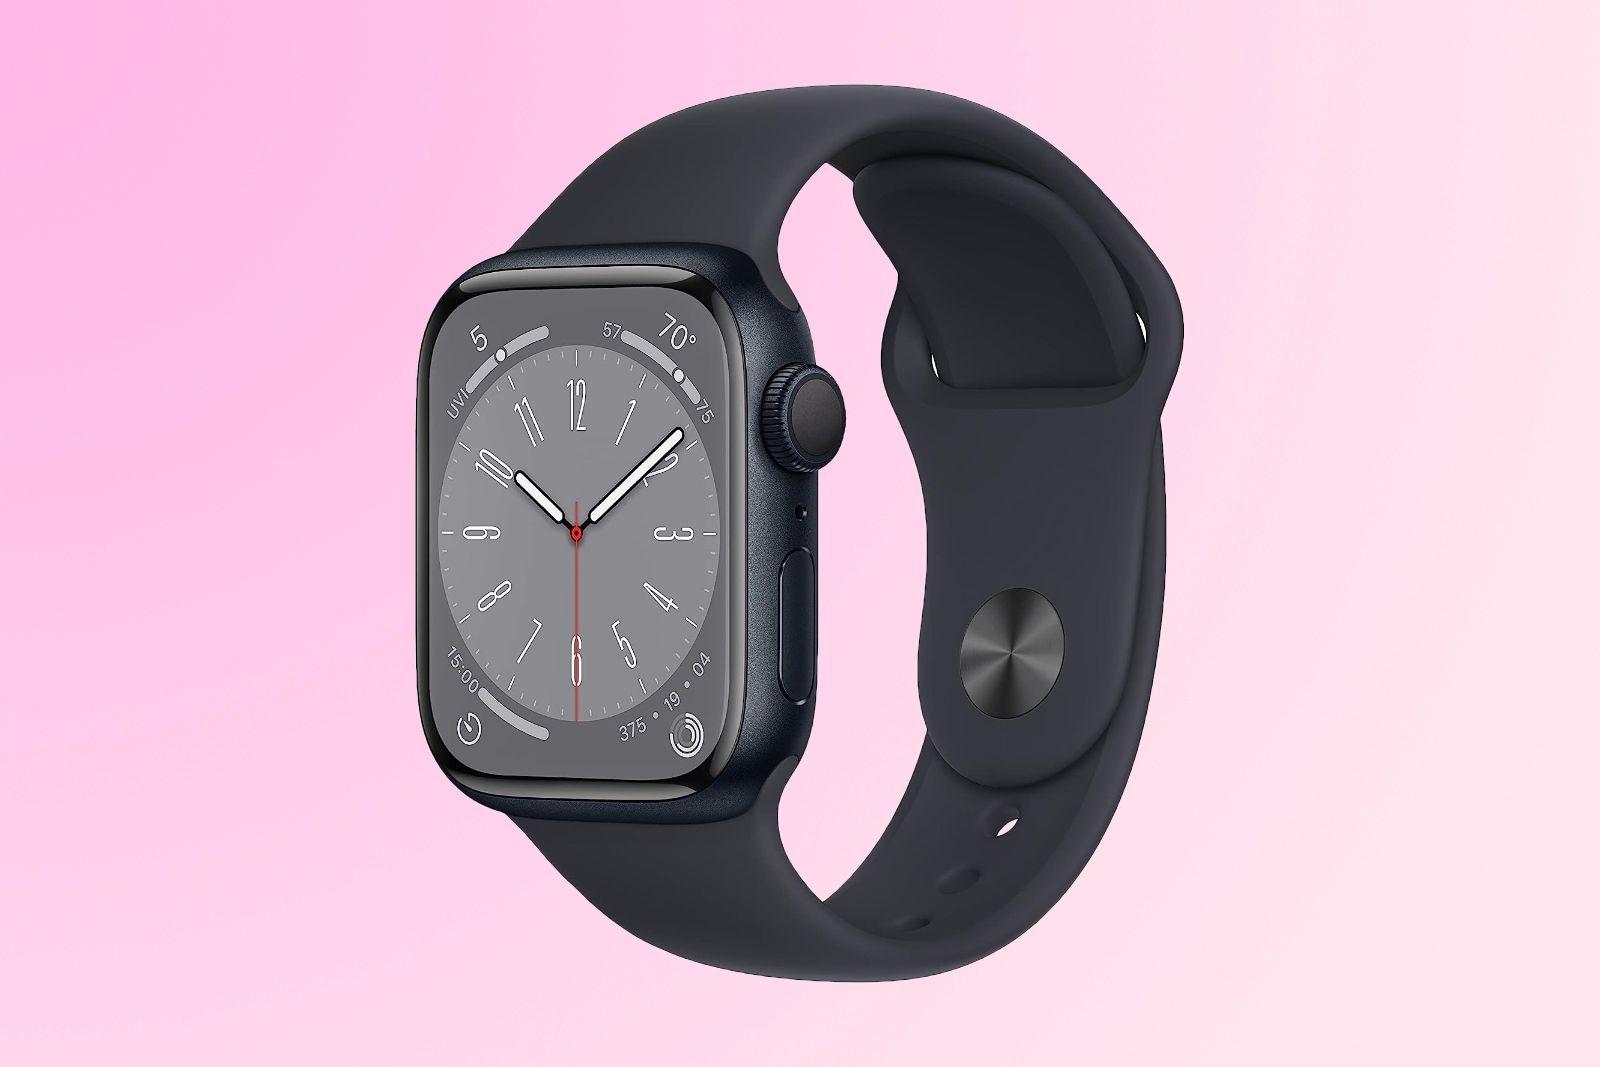 The space grey Apple Watch Series 8 with front screen and back clasp visible.